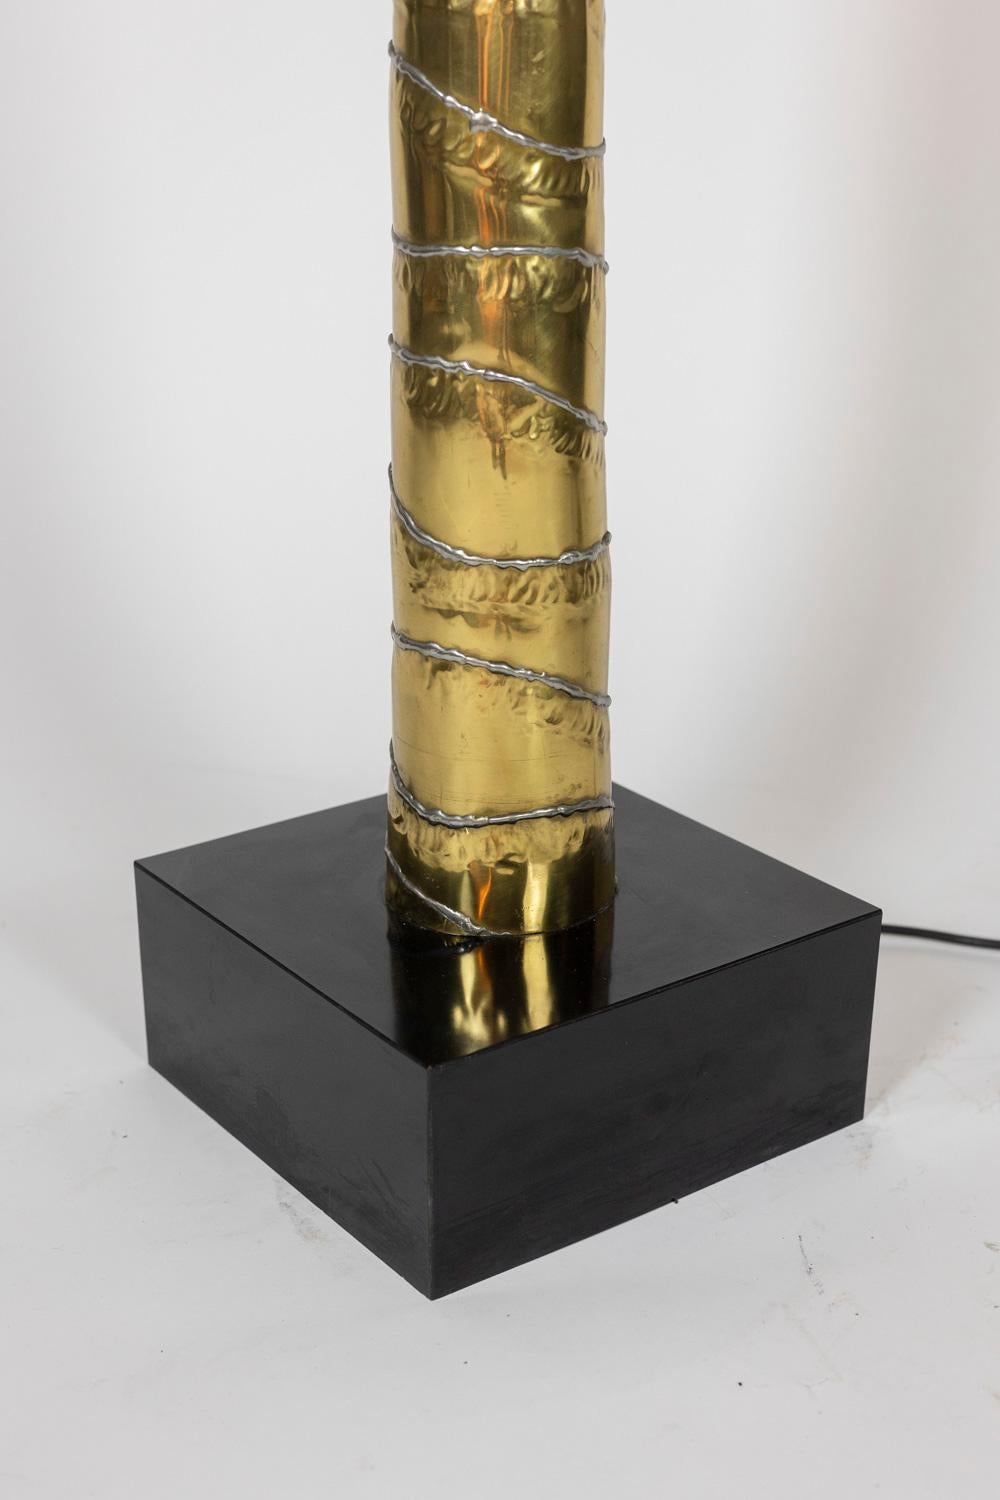 Henri Fernandez, by.
Maison Honoré, edited by.

Floor lamp in gold and silver brass, representing a palm tree, ending in a black lacquered wooden base with a square shape.

French work realized in the 1970s.

Possibility of forming a “pair” with